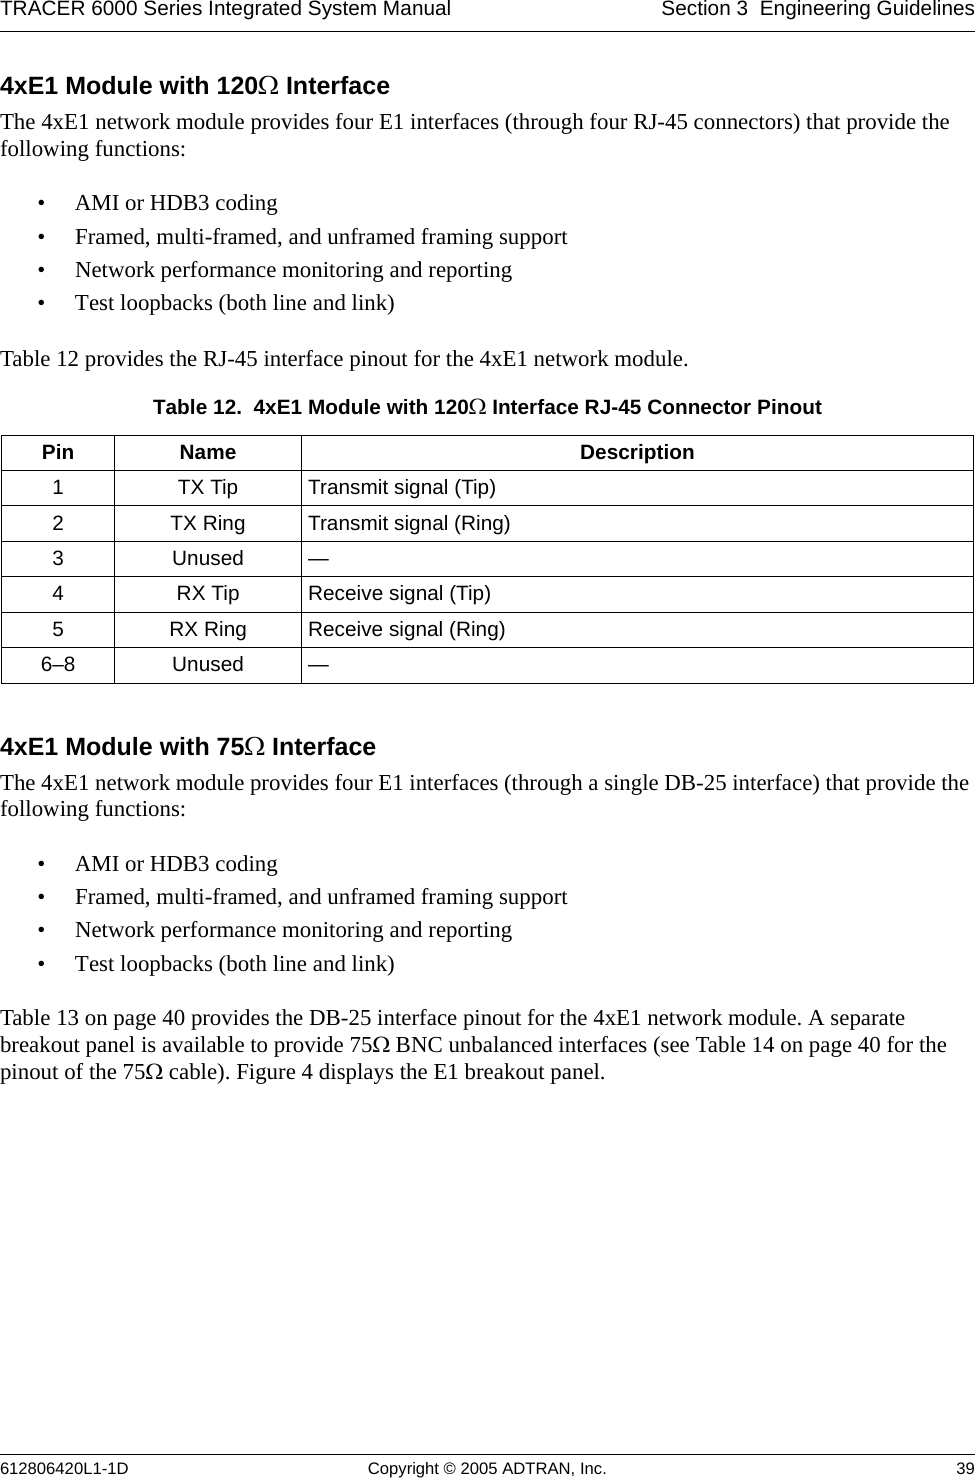 TRACER 6000 Series Integrated System Manual Section 3  Engineering Guidelines612806420L1-1D Copyright © 2005 ADTRAN, Inc. 394xE1 Module with 120Ω InterfaceThe 4xE1 network module provides four E1 interfaces (through four RJ-45 connectors) that provide the following functions:• AMI or HDB3 coding• Framed, multi-framed, and unframed framing support• Network performance monitoring and reporting• Test loopbacks (both line and link)Table 12 provides the RJ-45 interface pinout for the 4xE1 network module. 4xE1 Module with 75Ω InterfaceThe 4xE1 network module provides four E1 interfaces (through a single DB-25 interface) that provide the following functions:• AMI or HDB3 coding• Framed, multi-framed, and unframed framing support• Network performance monitoring and reporting• Test loopbacks (both line and link)Table 13 on page 40 provides the DB-25 interface pinout for the 4xE1 network module. A separate breakout panel is available to provide 75Ω BNC unbalanced interfaces (see Table 14 on page 40 for the pinout of the 75Ω cable). Figure 4 displays the E1 breakout panel.Table 12.  4xE1 Module with 120Ω Interface RJ-45 Connector Pinout Pin Name Description1 TX Tip Transmit signal (Tip)2 TX Ring Transmit signal (Ring)3Unused—4 RX Tip Receive signal (Tip)5 RX Ring Receive signal (Ring)6–8 Unused —